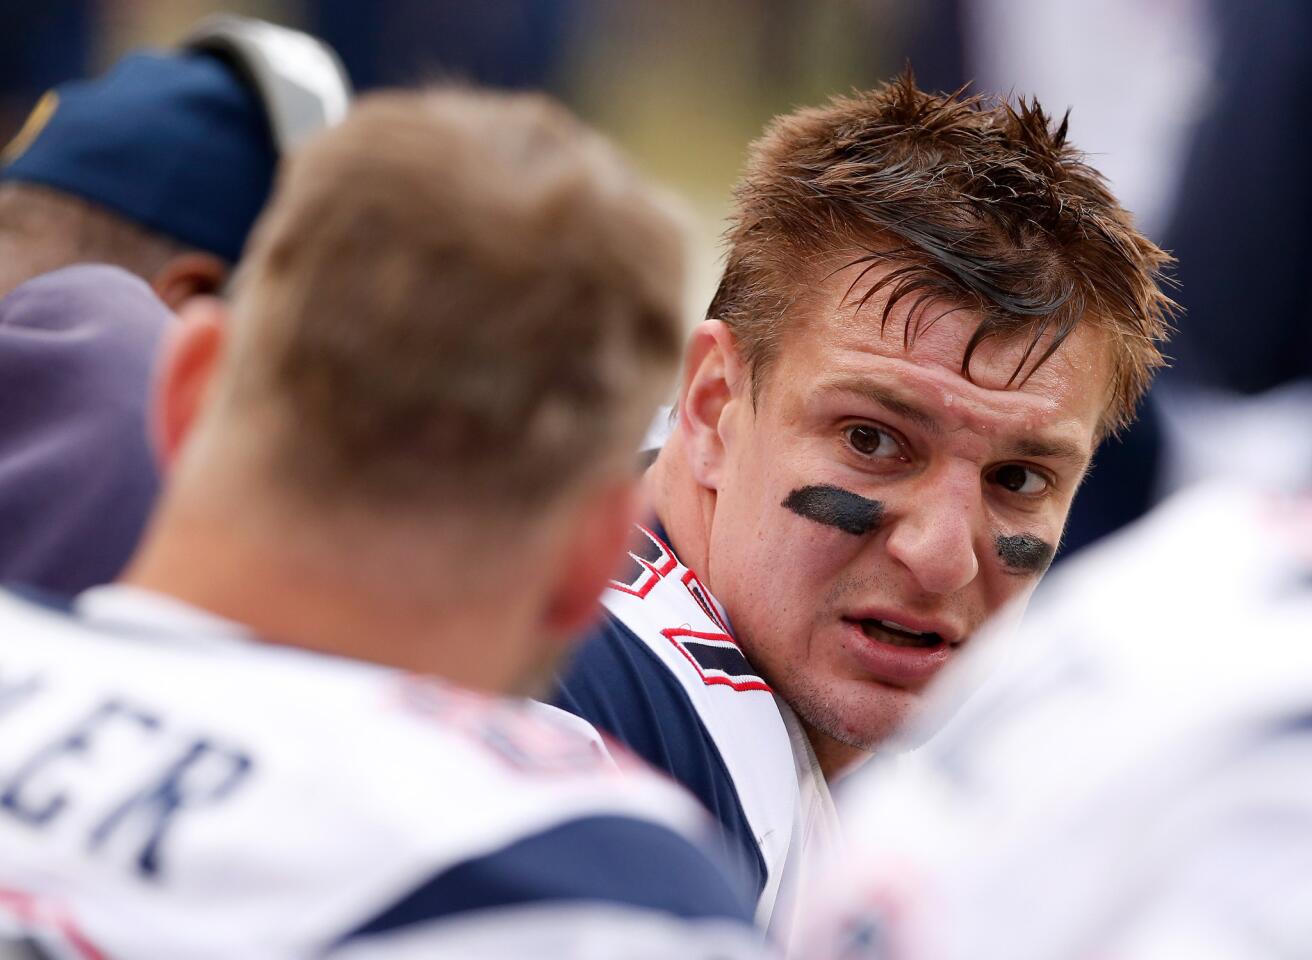 Patriots tight end Rob Gronkowski looks on from the sideline during the first half of the AFC Championship game against the Broncos on Jan. 24.